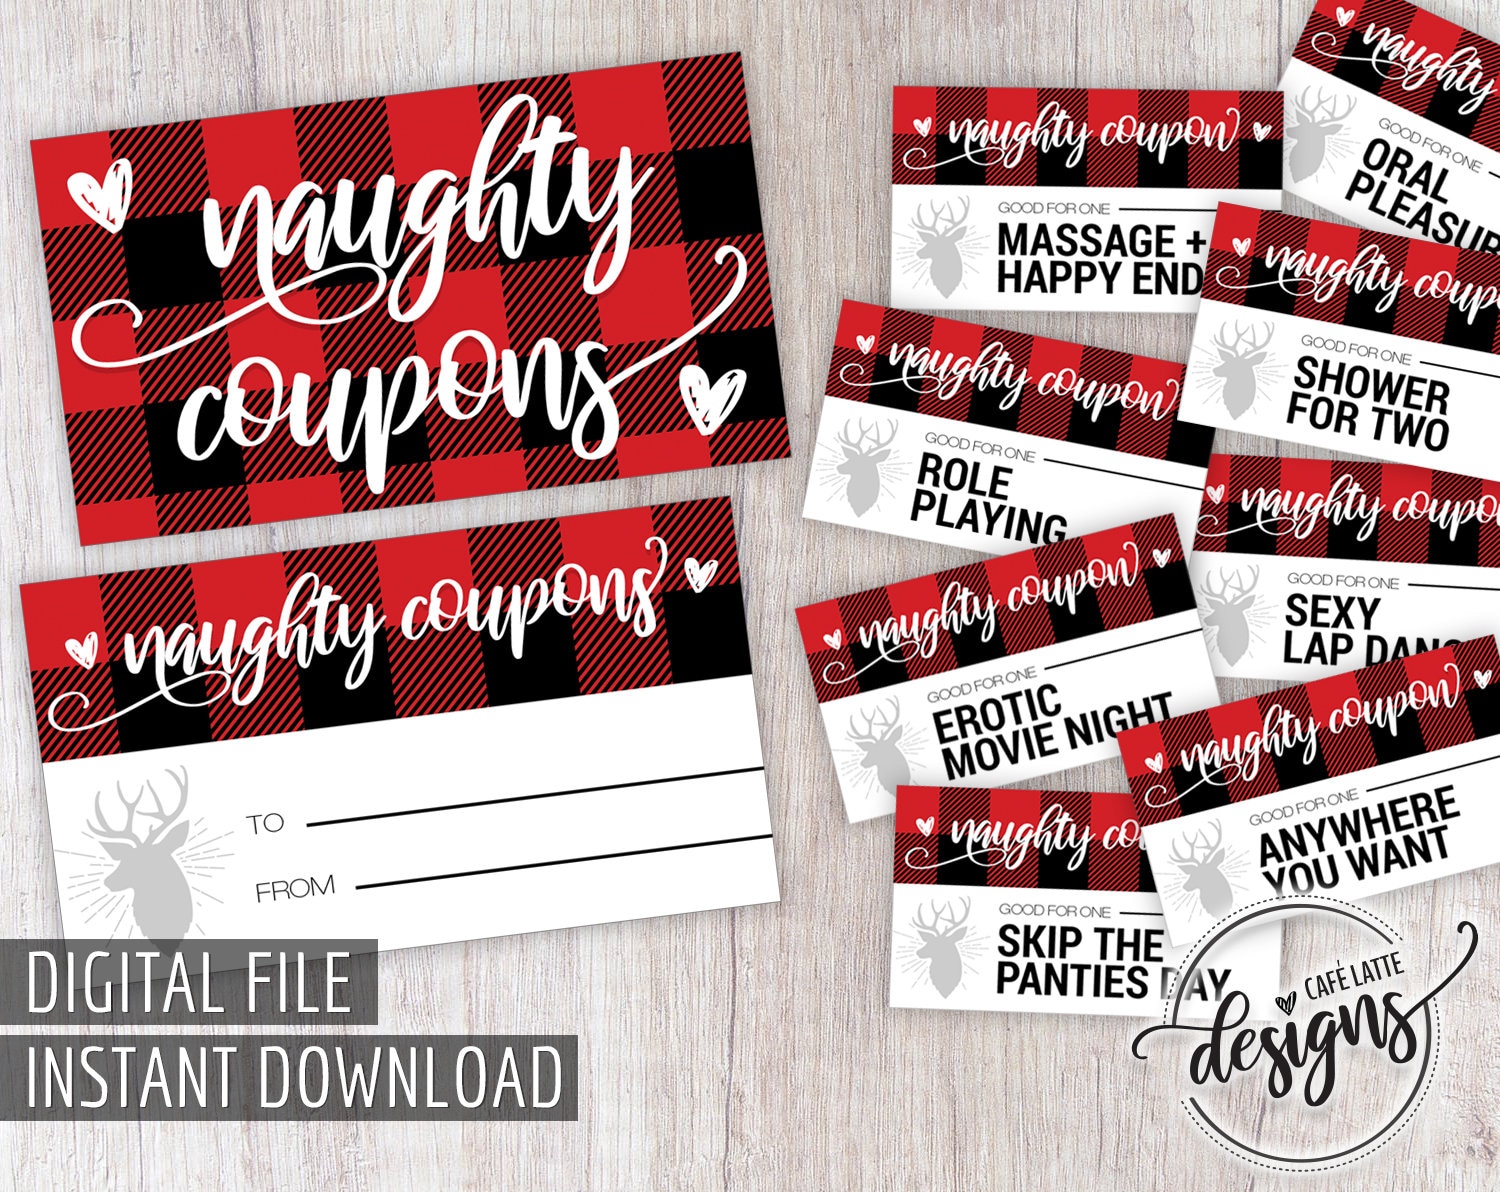 Sexy Naughty Coupons Christmas Gift Love Sex Coupons Gifts photo pic